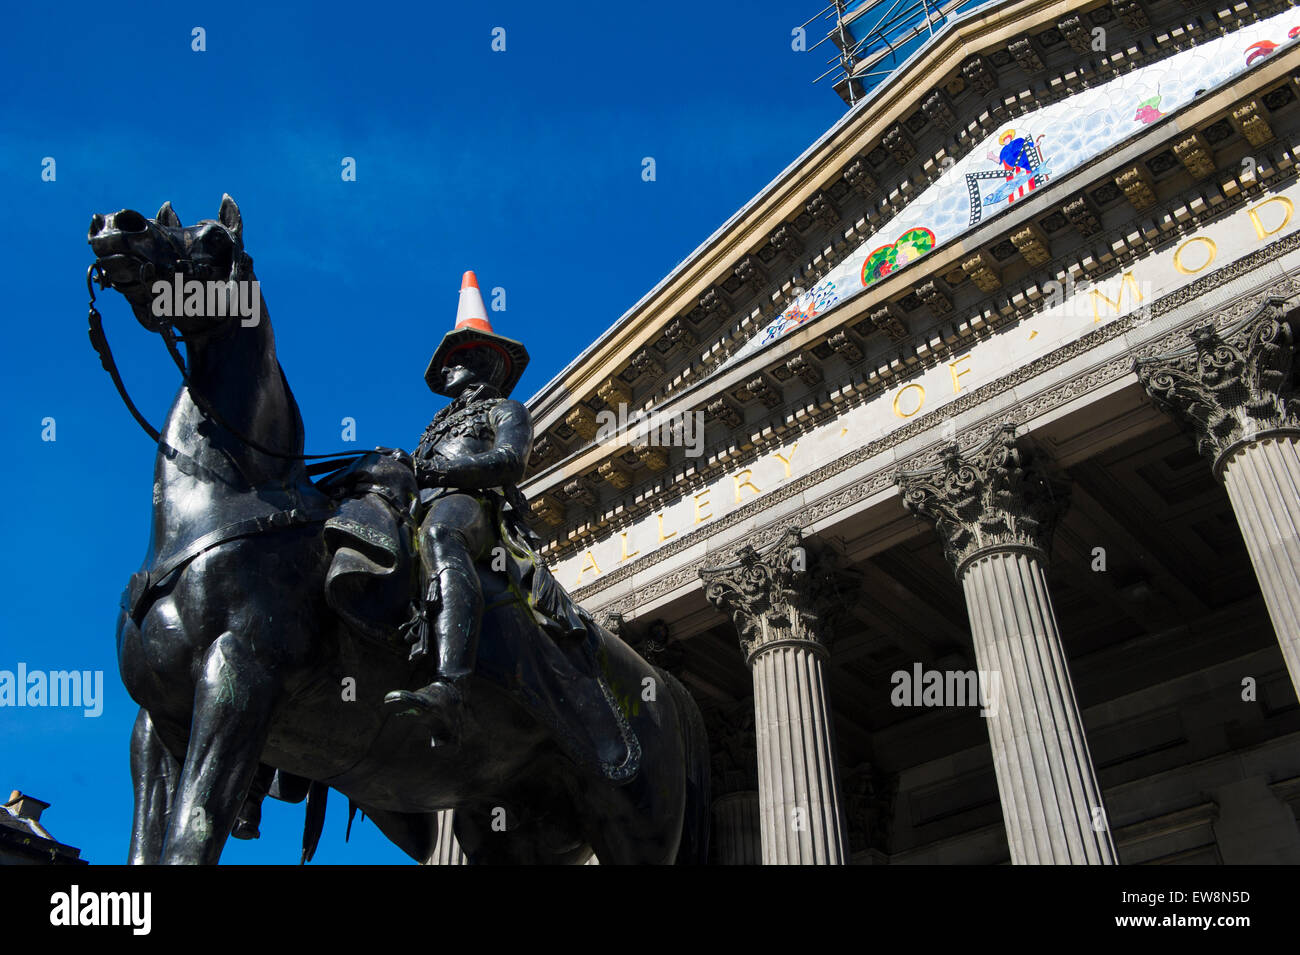 Statue of Duke of Wellington with traffic cones outside Museum of Modern Art Glasgow Scotland with a traffic cone on his head Stock Photo